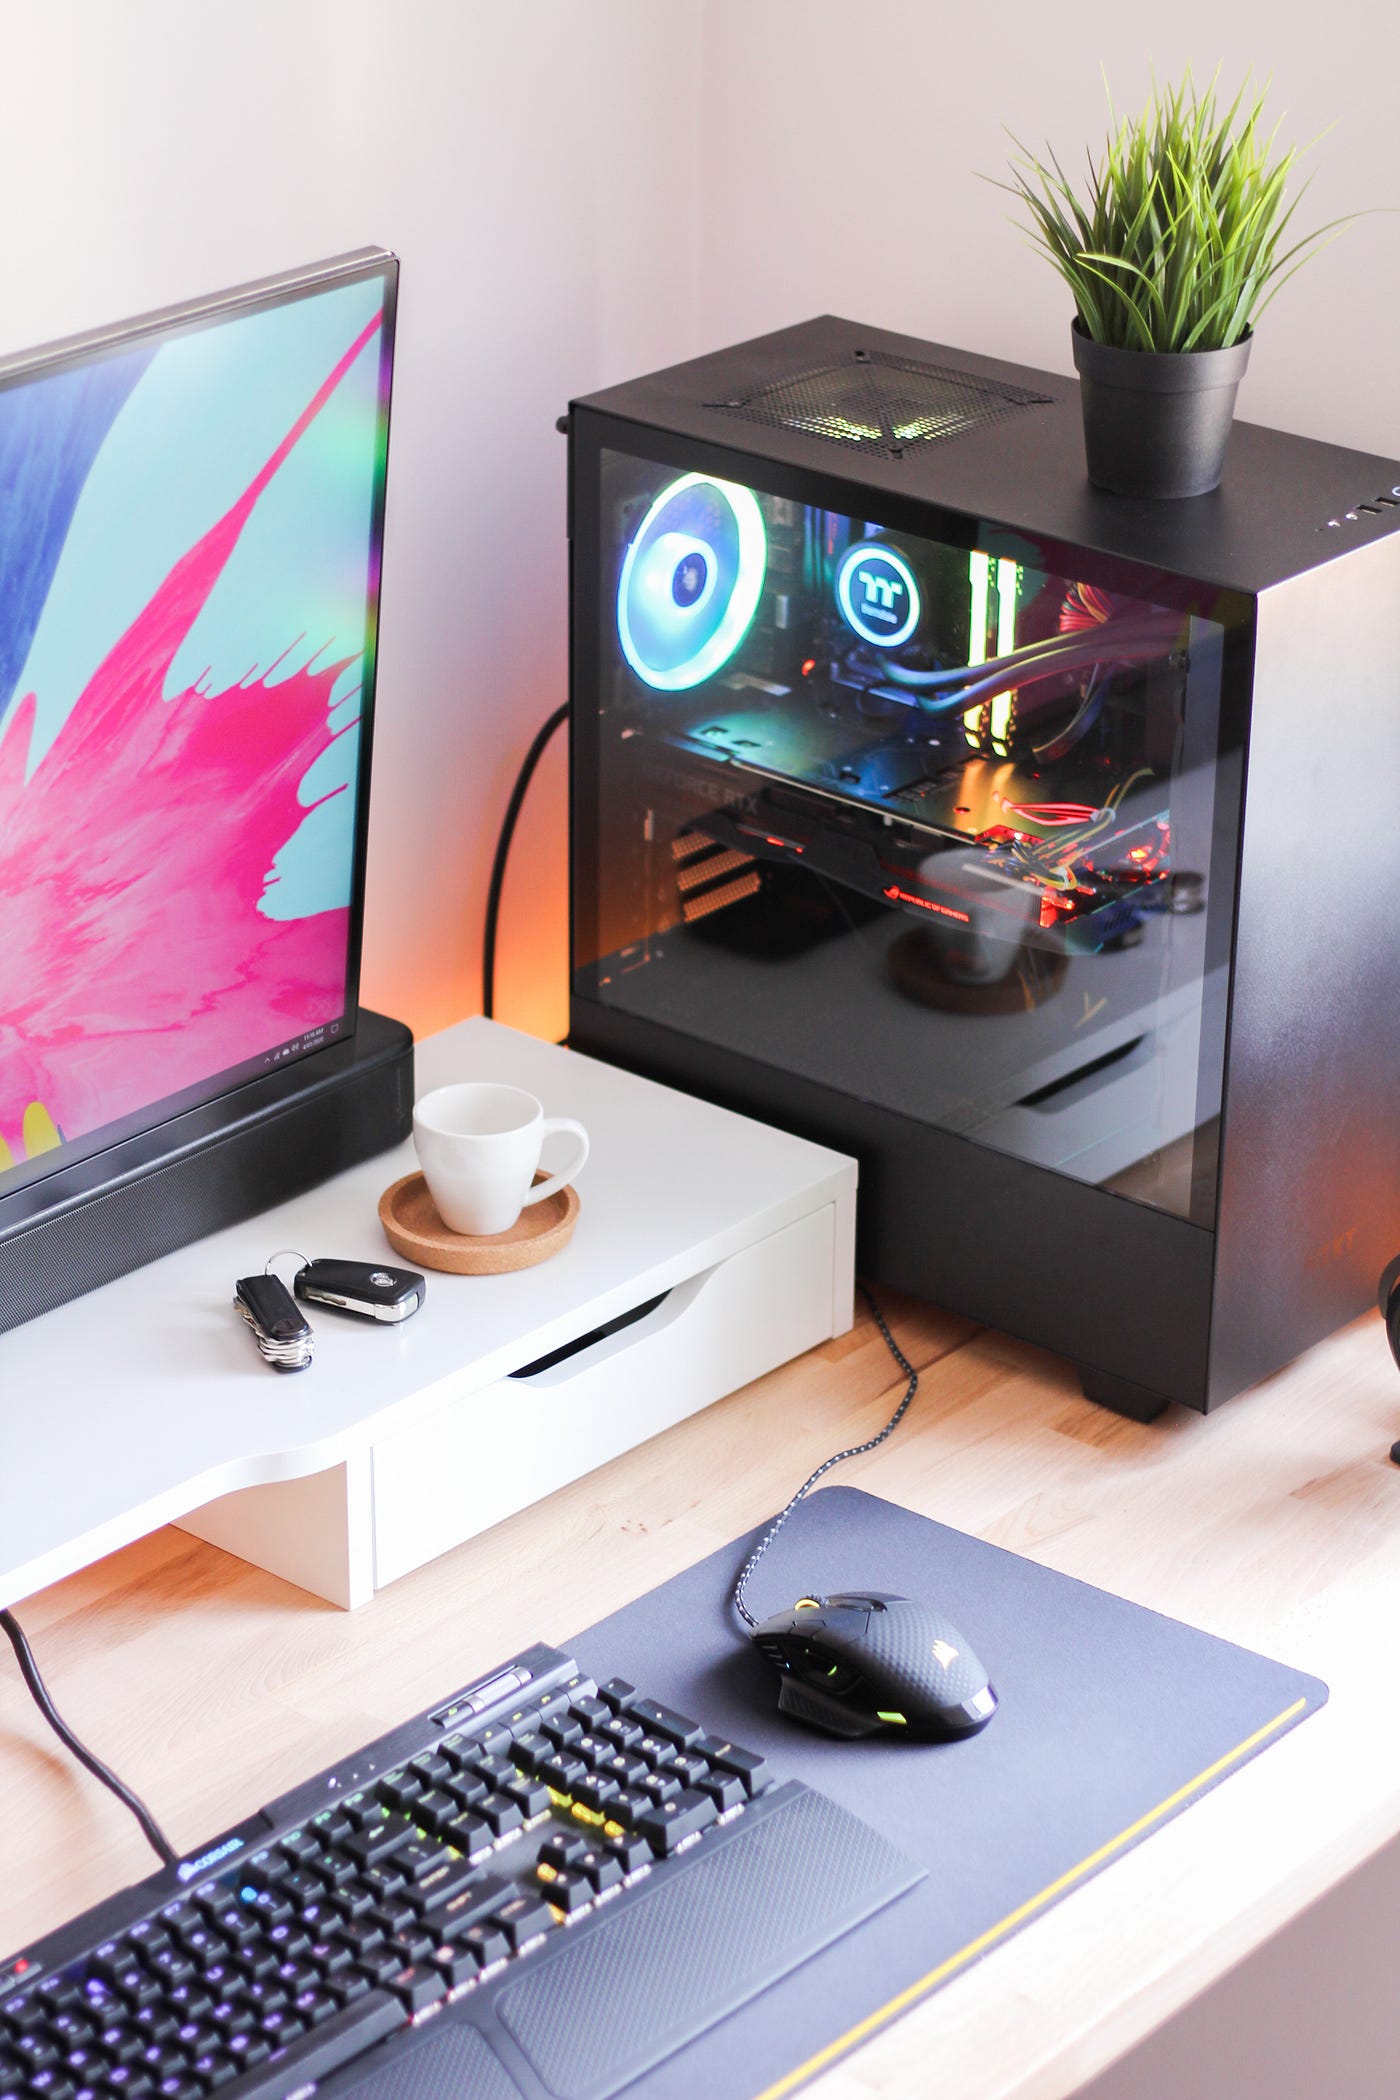 Desktop PC as “One Ring To Rule Them All” of Home Computing | by Yayaati |  Geek Culture | Medium